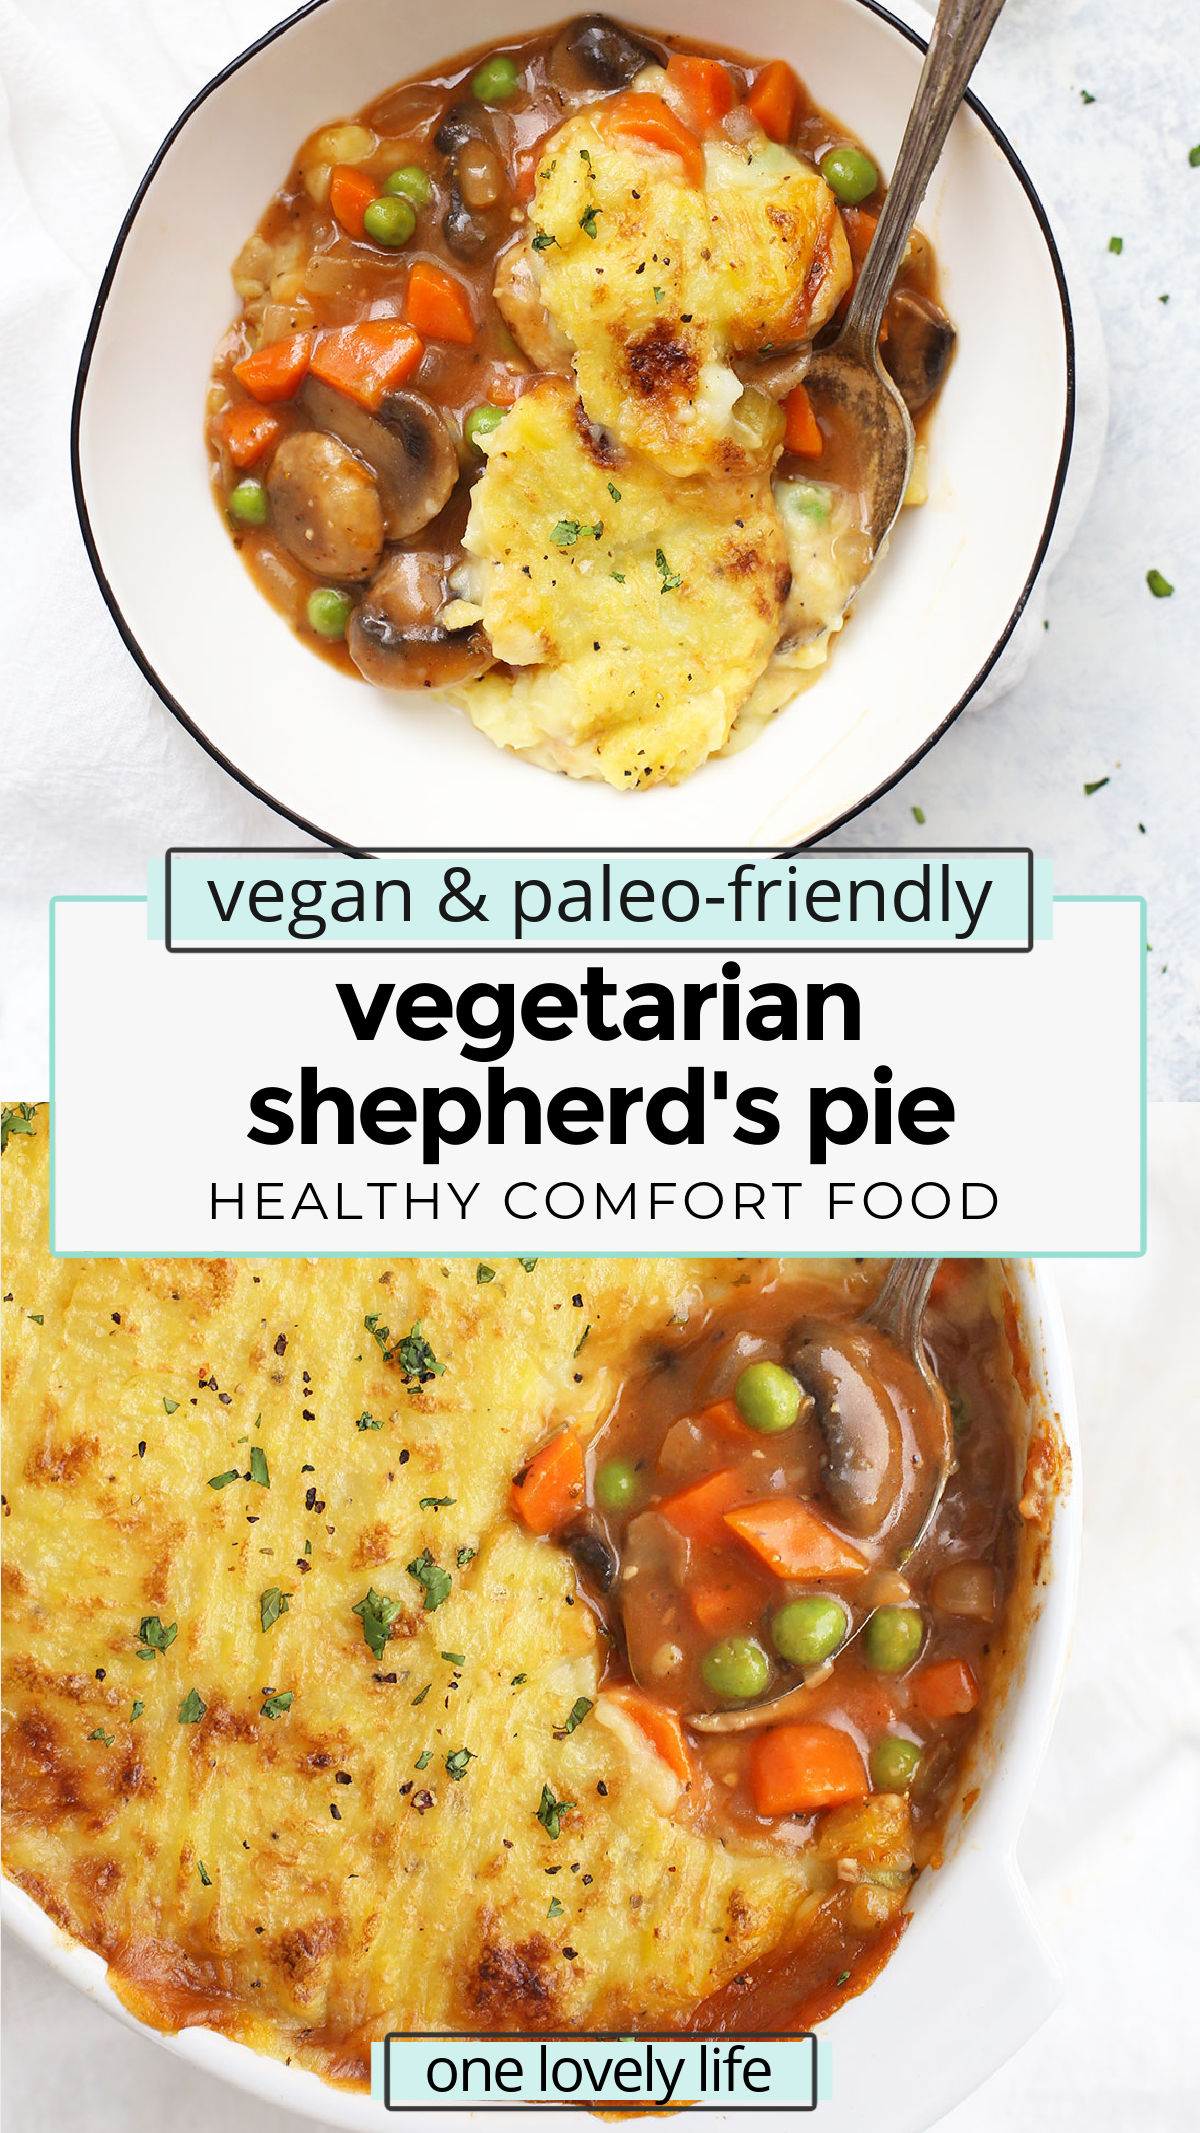 Vegetarian Shepherd's Pie - Packed with veggies and a simple mashed potato (or cauliflower!) topping, this cozy vegetarian shepherd's pie is comfort food at it's finest! (Gluten Free, Dairy Free, Vegan & Paleo Friendly) // vegan shepherds pie // vegetarian shepherds pie recipe // vegan comfort food // vegetarian comfort food // healthy comfort food // vegan mashed potatoes // vegetarian mashed potatoes // dairy free shepherds pie // gluten free shepherds pie